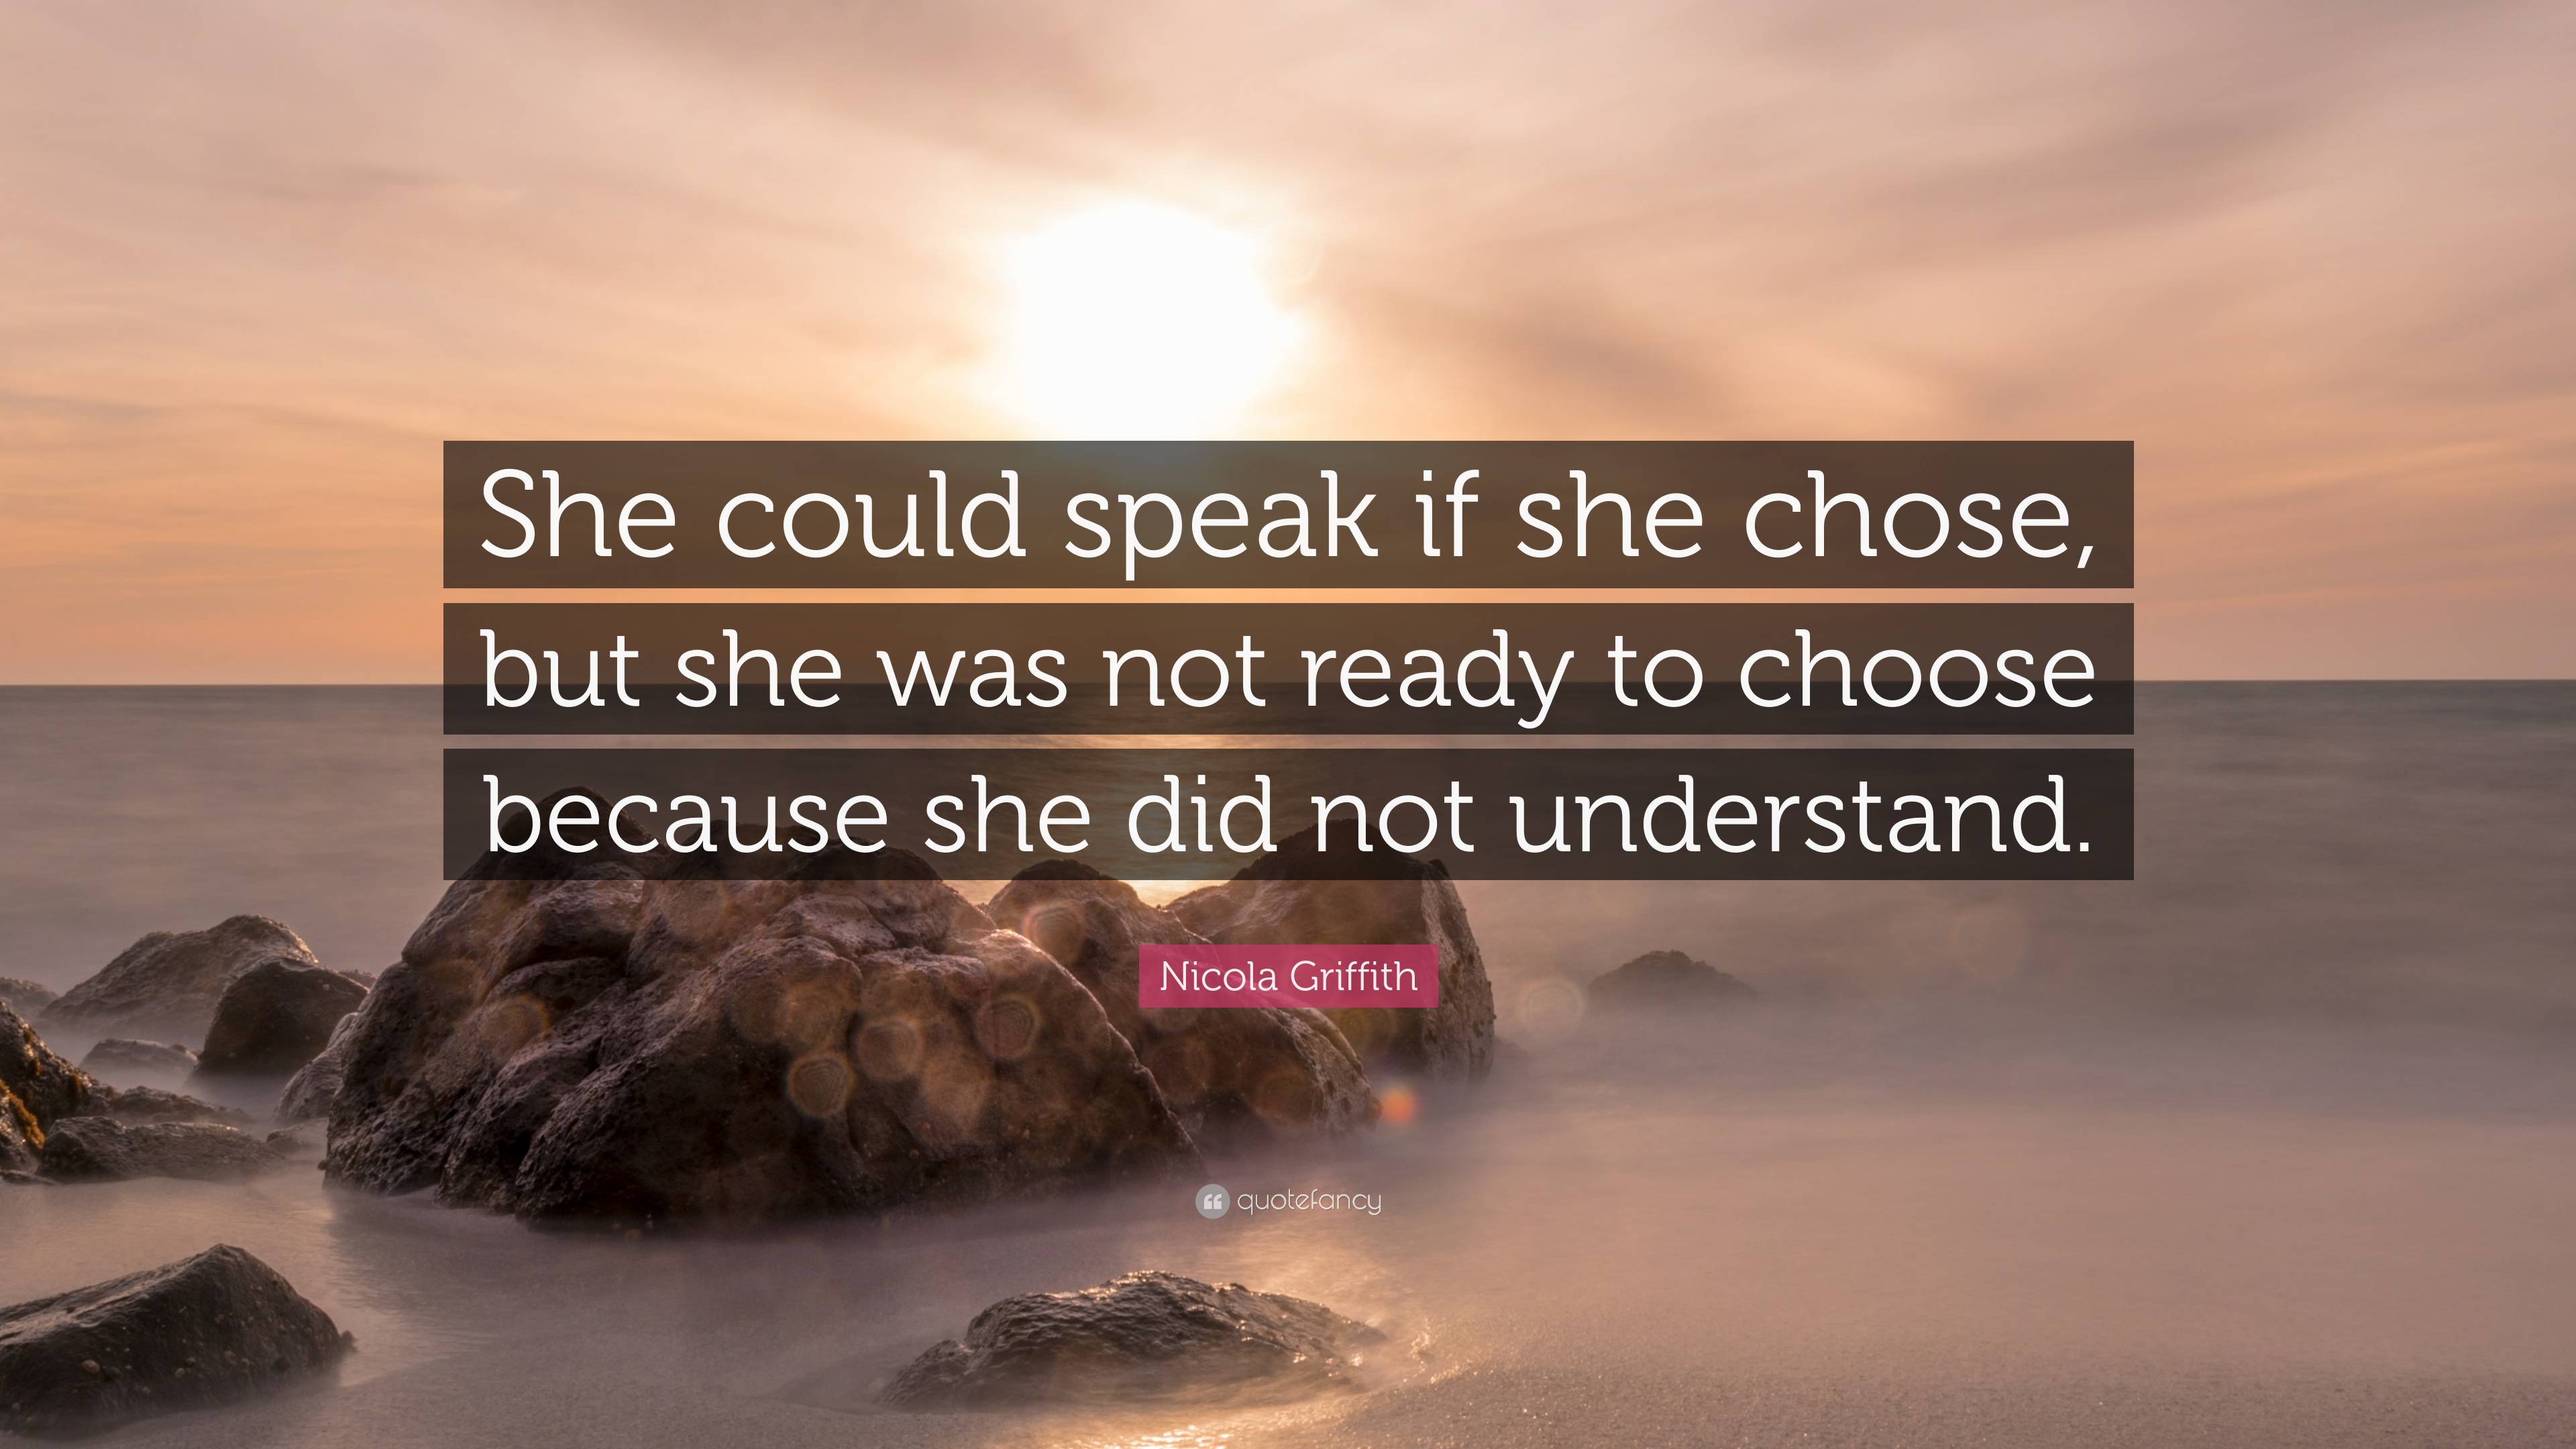 Nicola Griffith Quote: “She could speak if she chose, but she was not ...